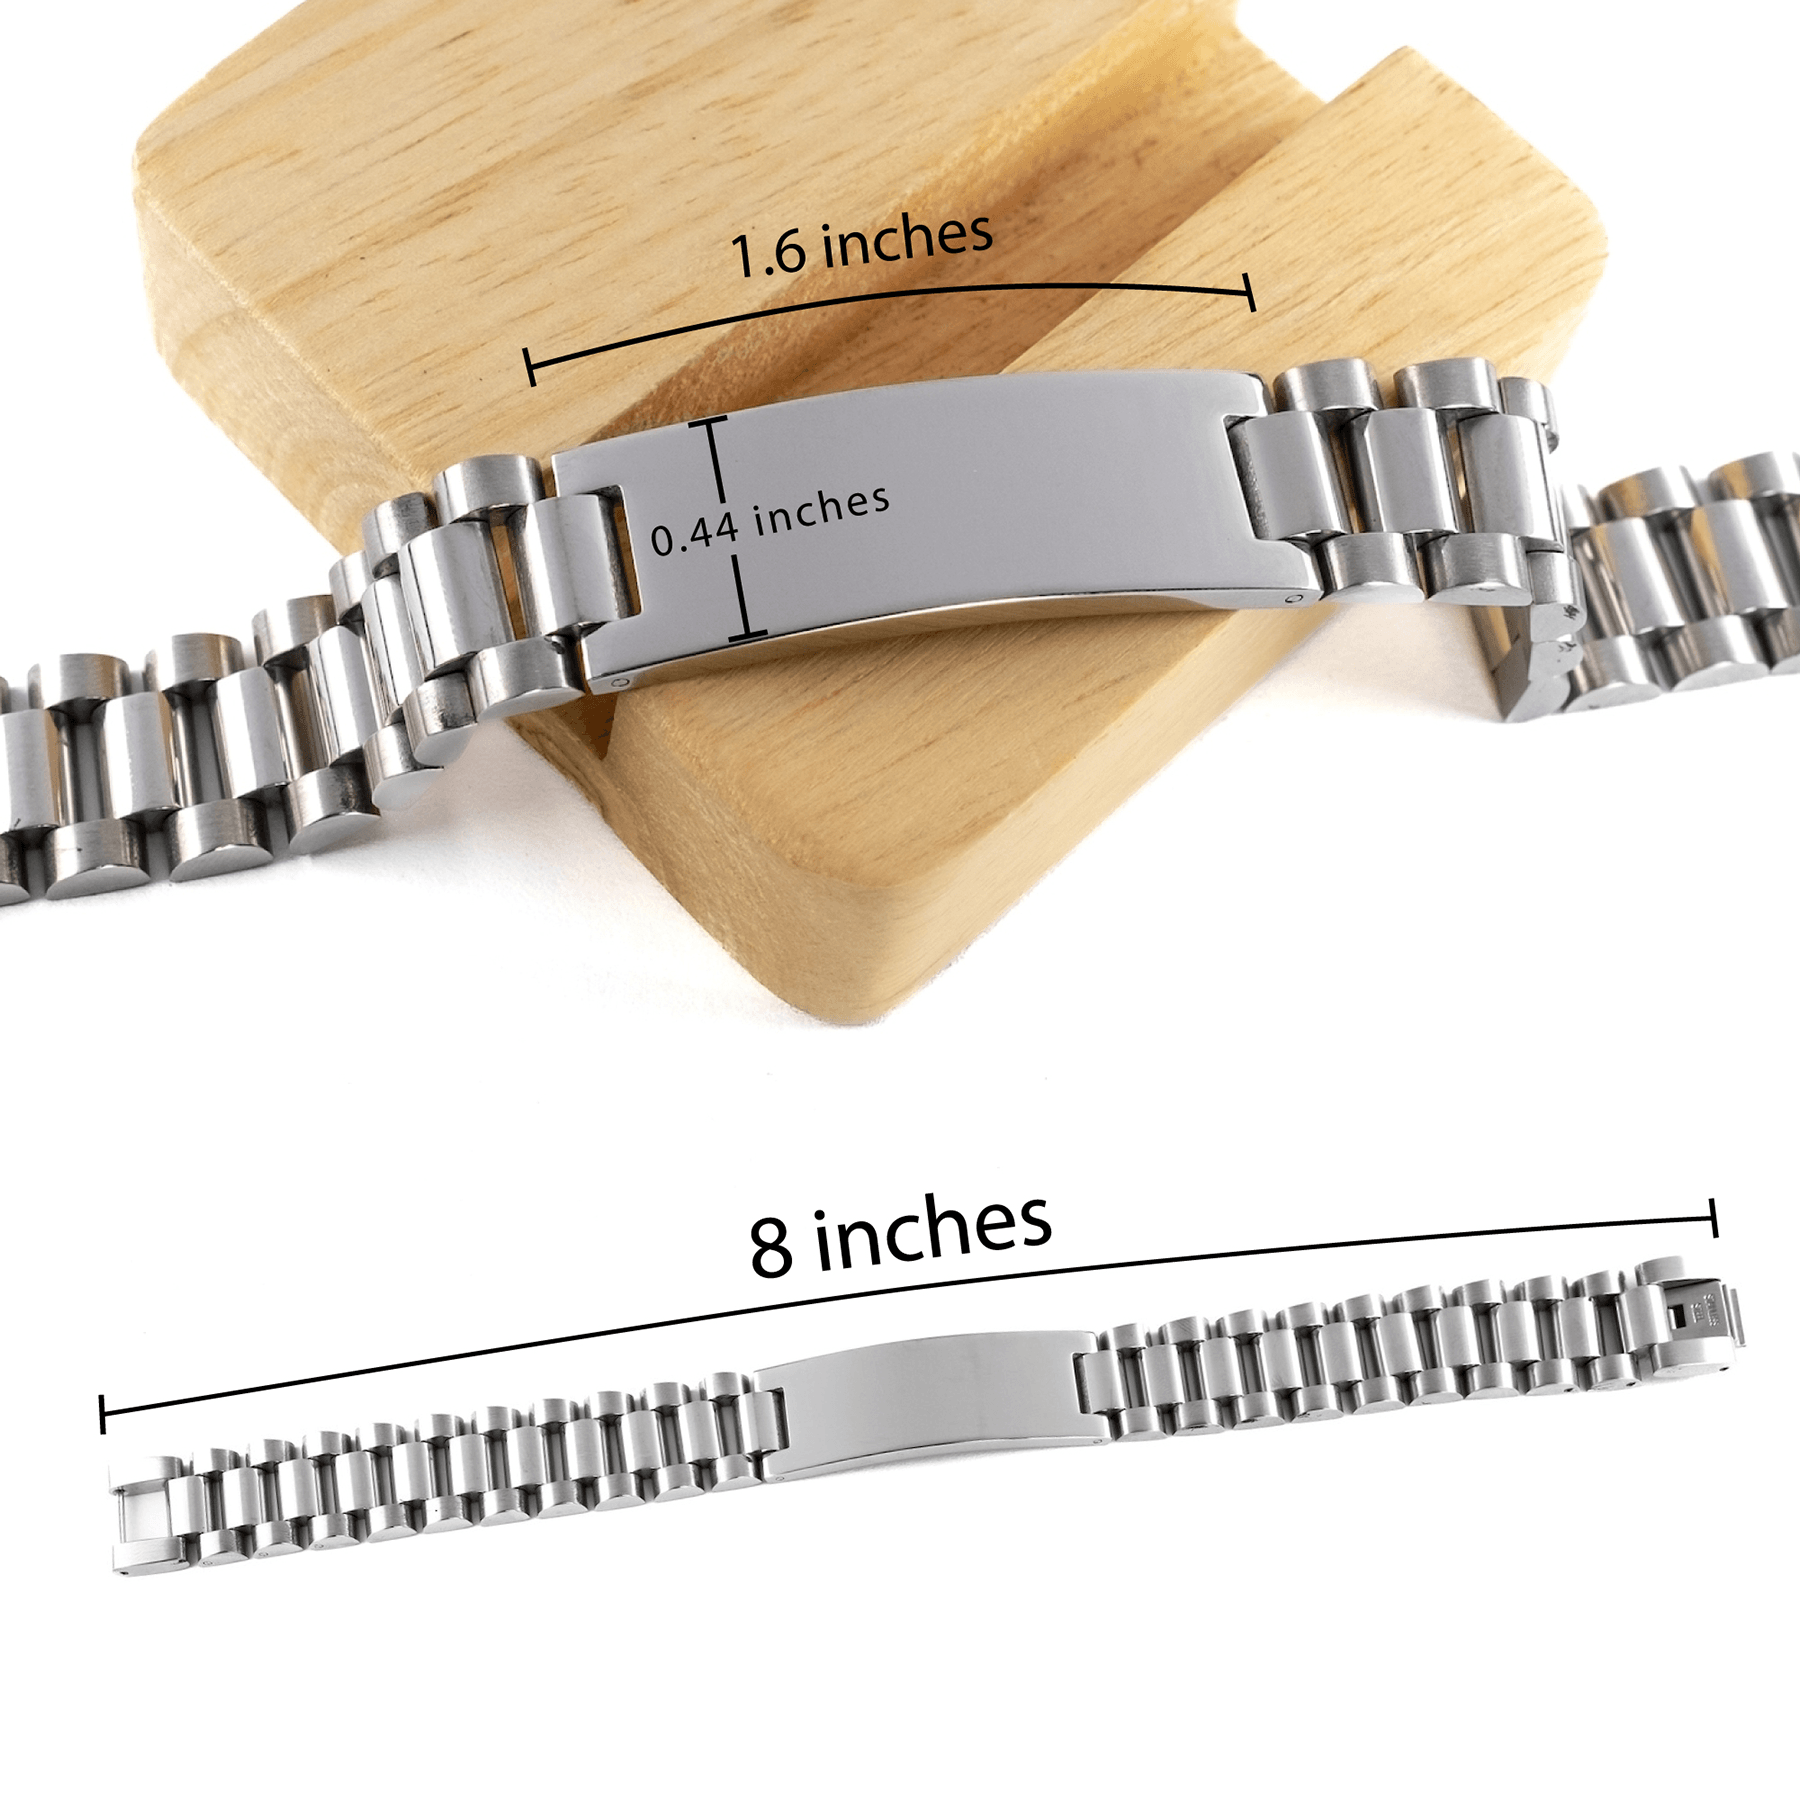 Musician Ladder Stainless Steel Engraved Bracelet - Thanks for being who you are - Birthday Christmas Jewelry Gifts Coworkers Colleague Boss - Mallard Moon Gift Shop